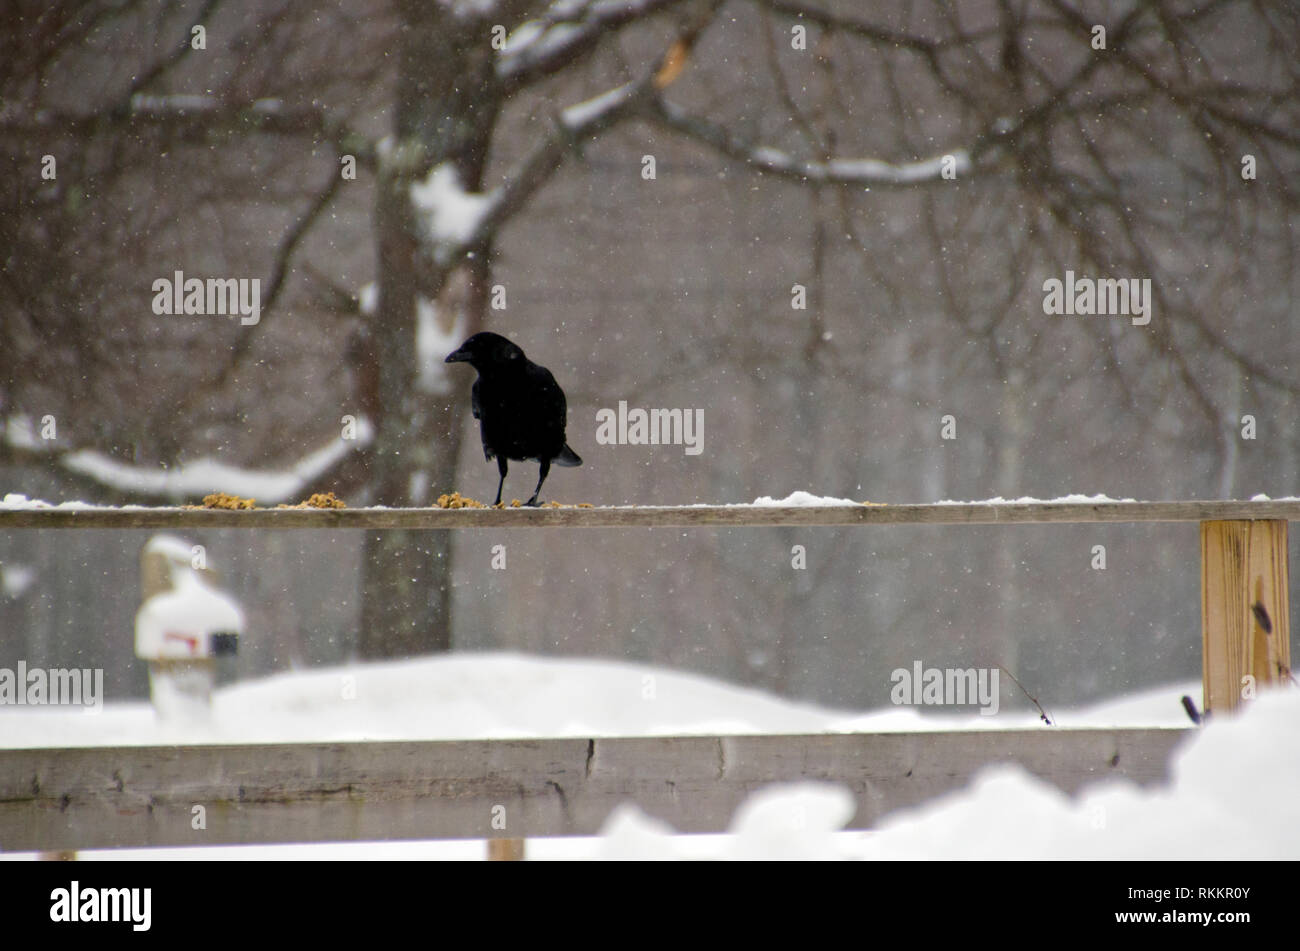 American crow standing on fence in falling snow eating food out left for it, Maine, USA Stock Photo